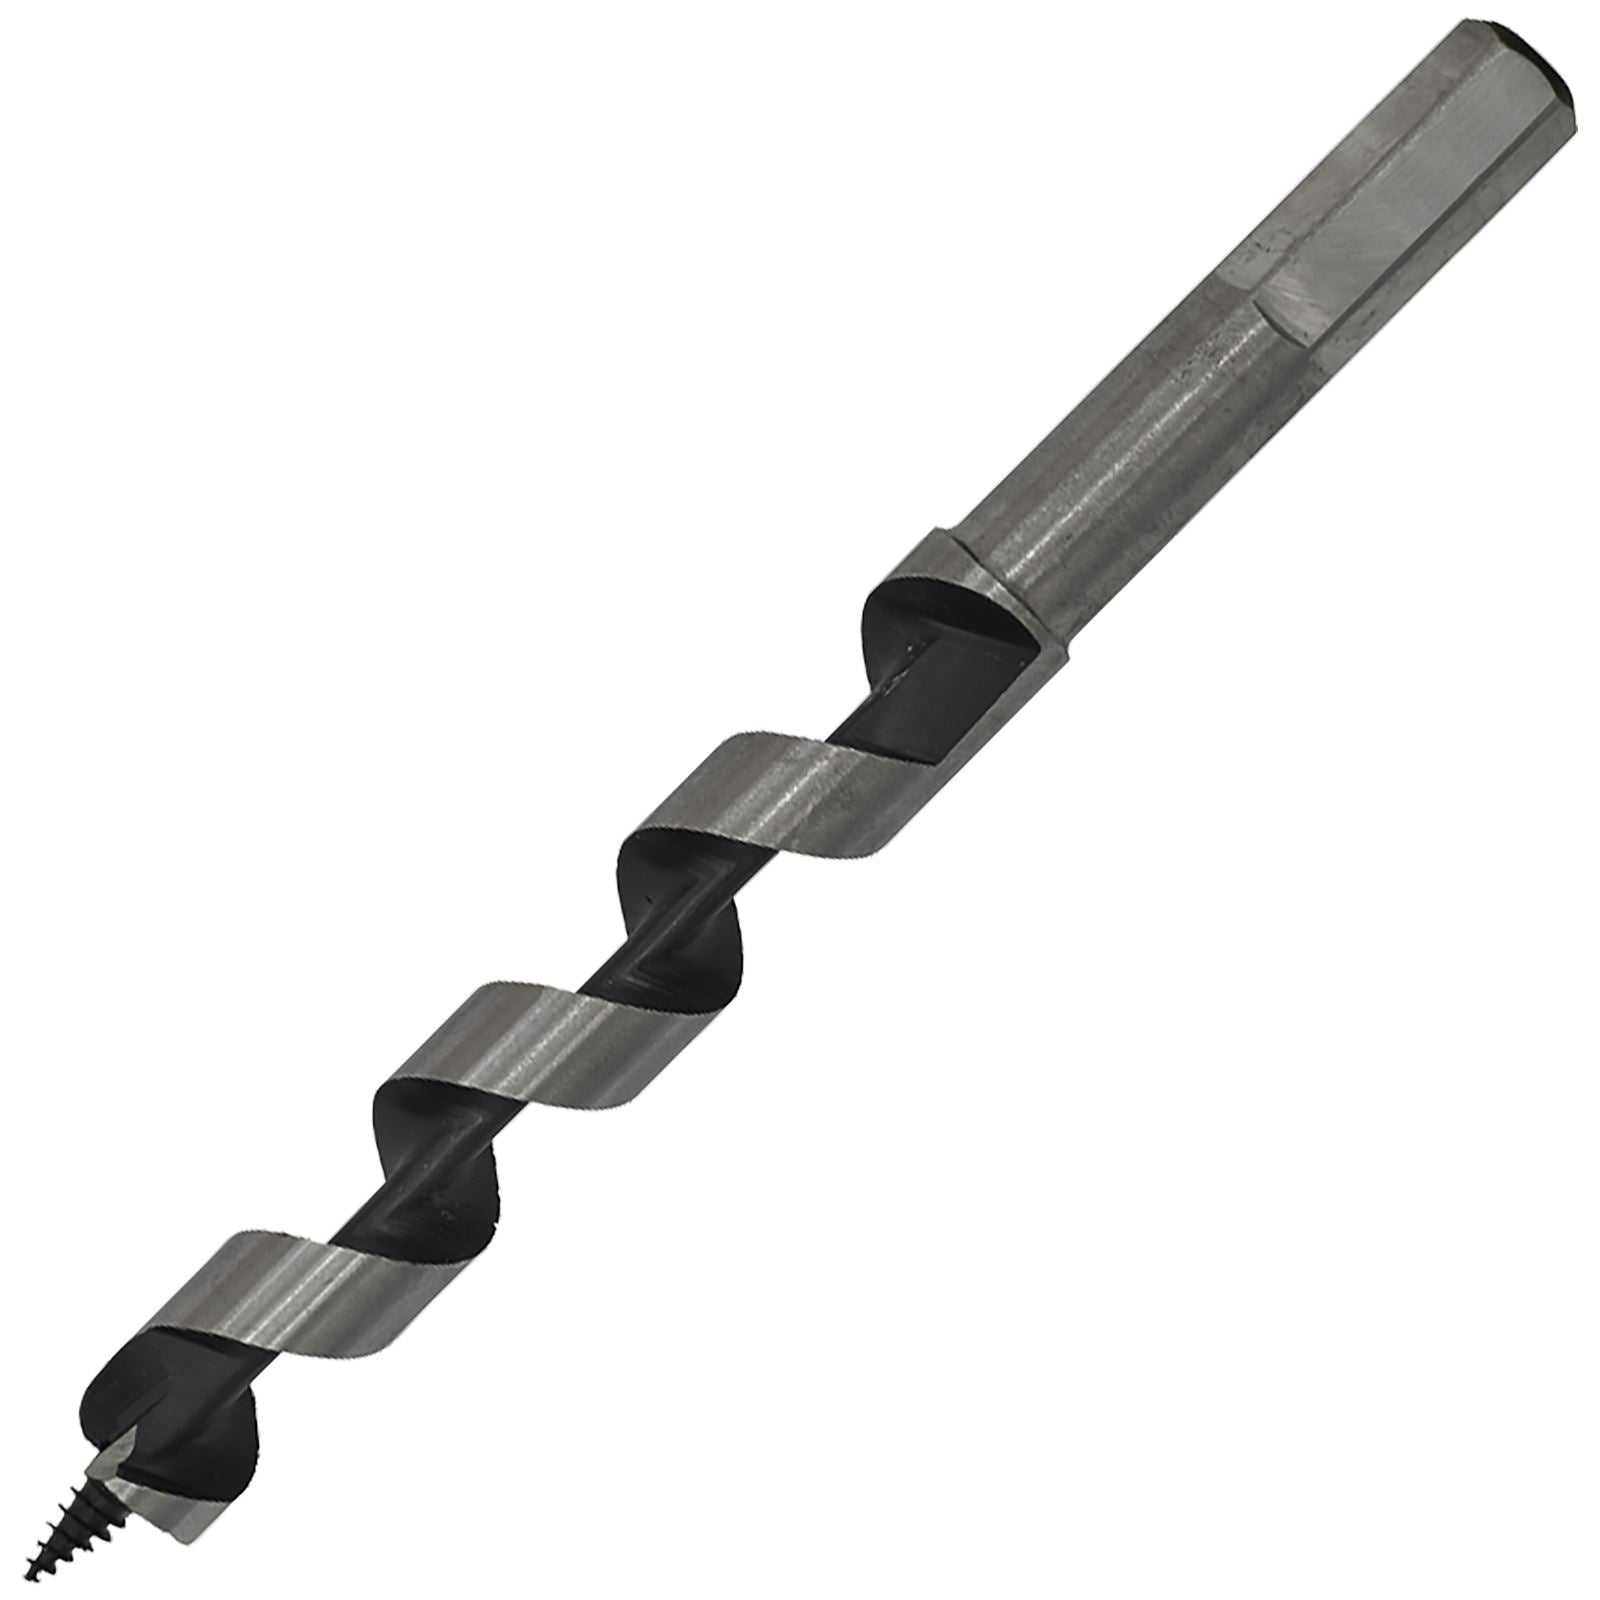 Worksafe by Sealey Auger Wood Drill Bit 14mm x 155mm